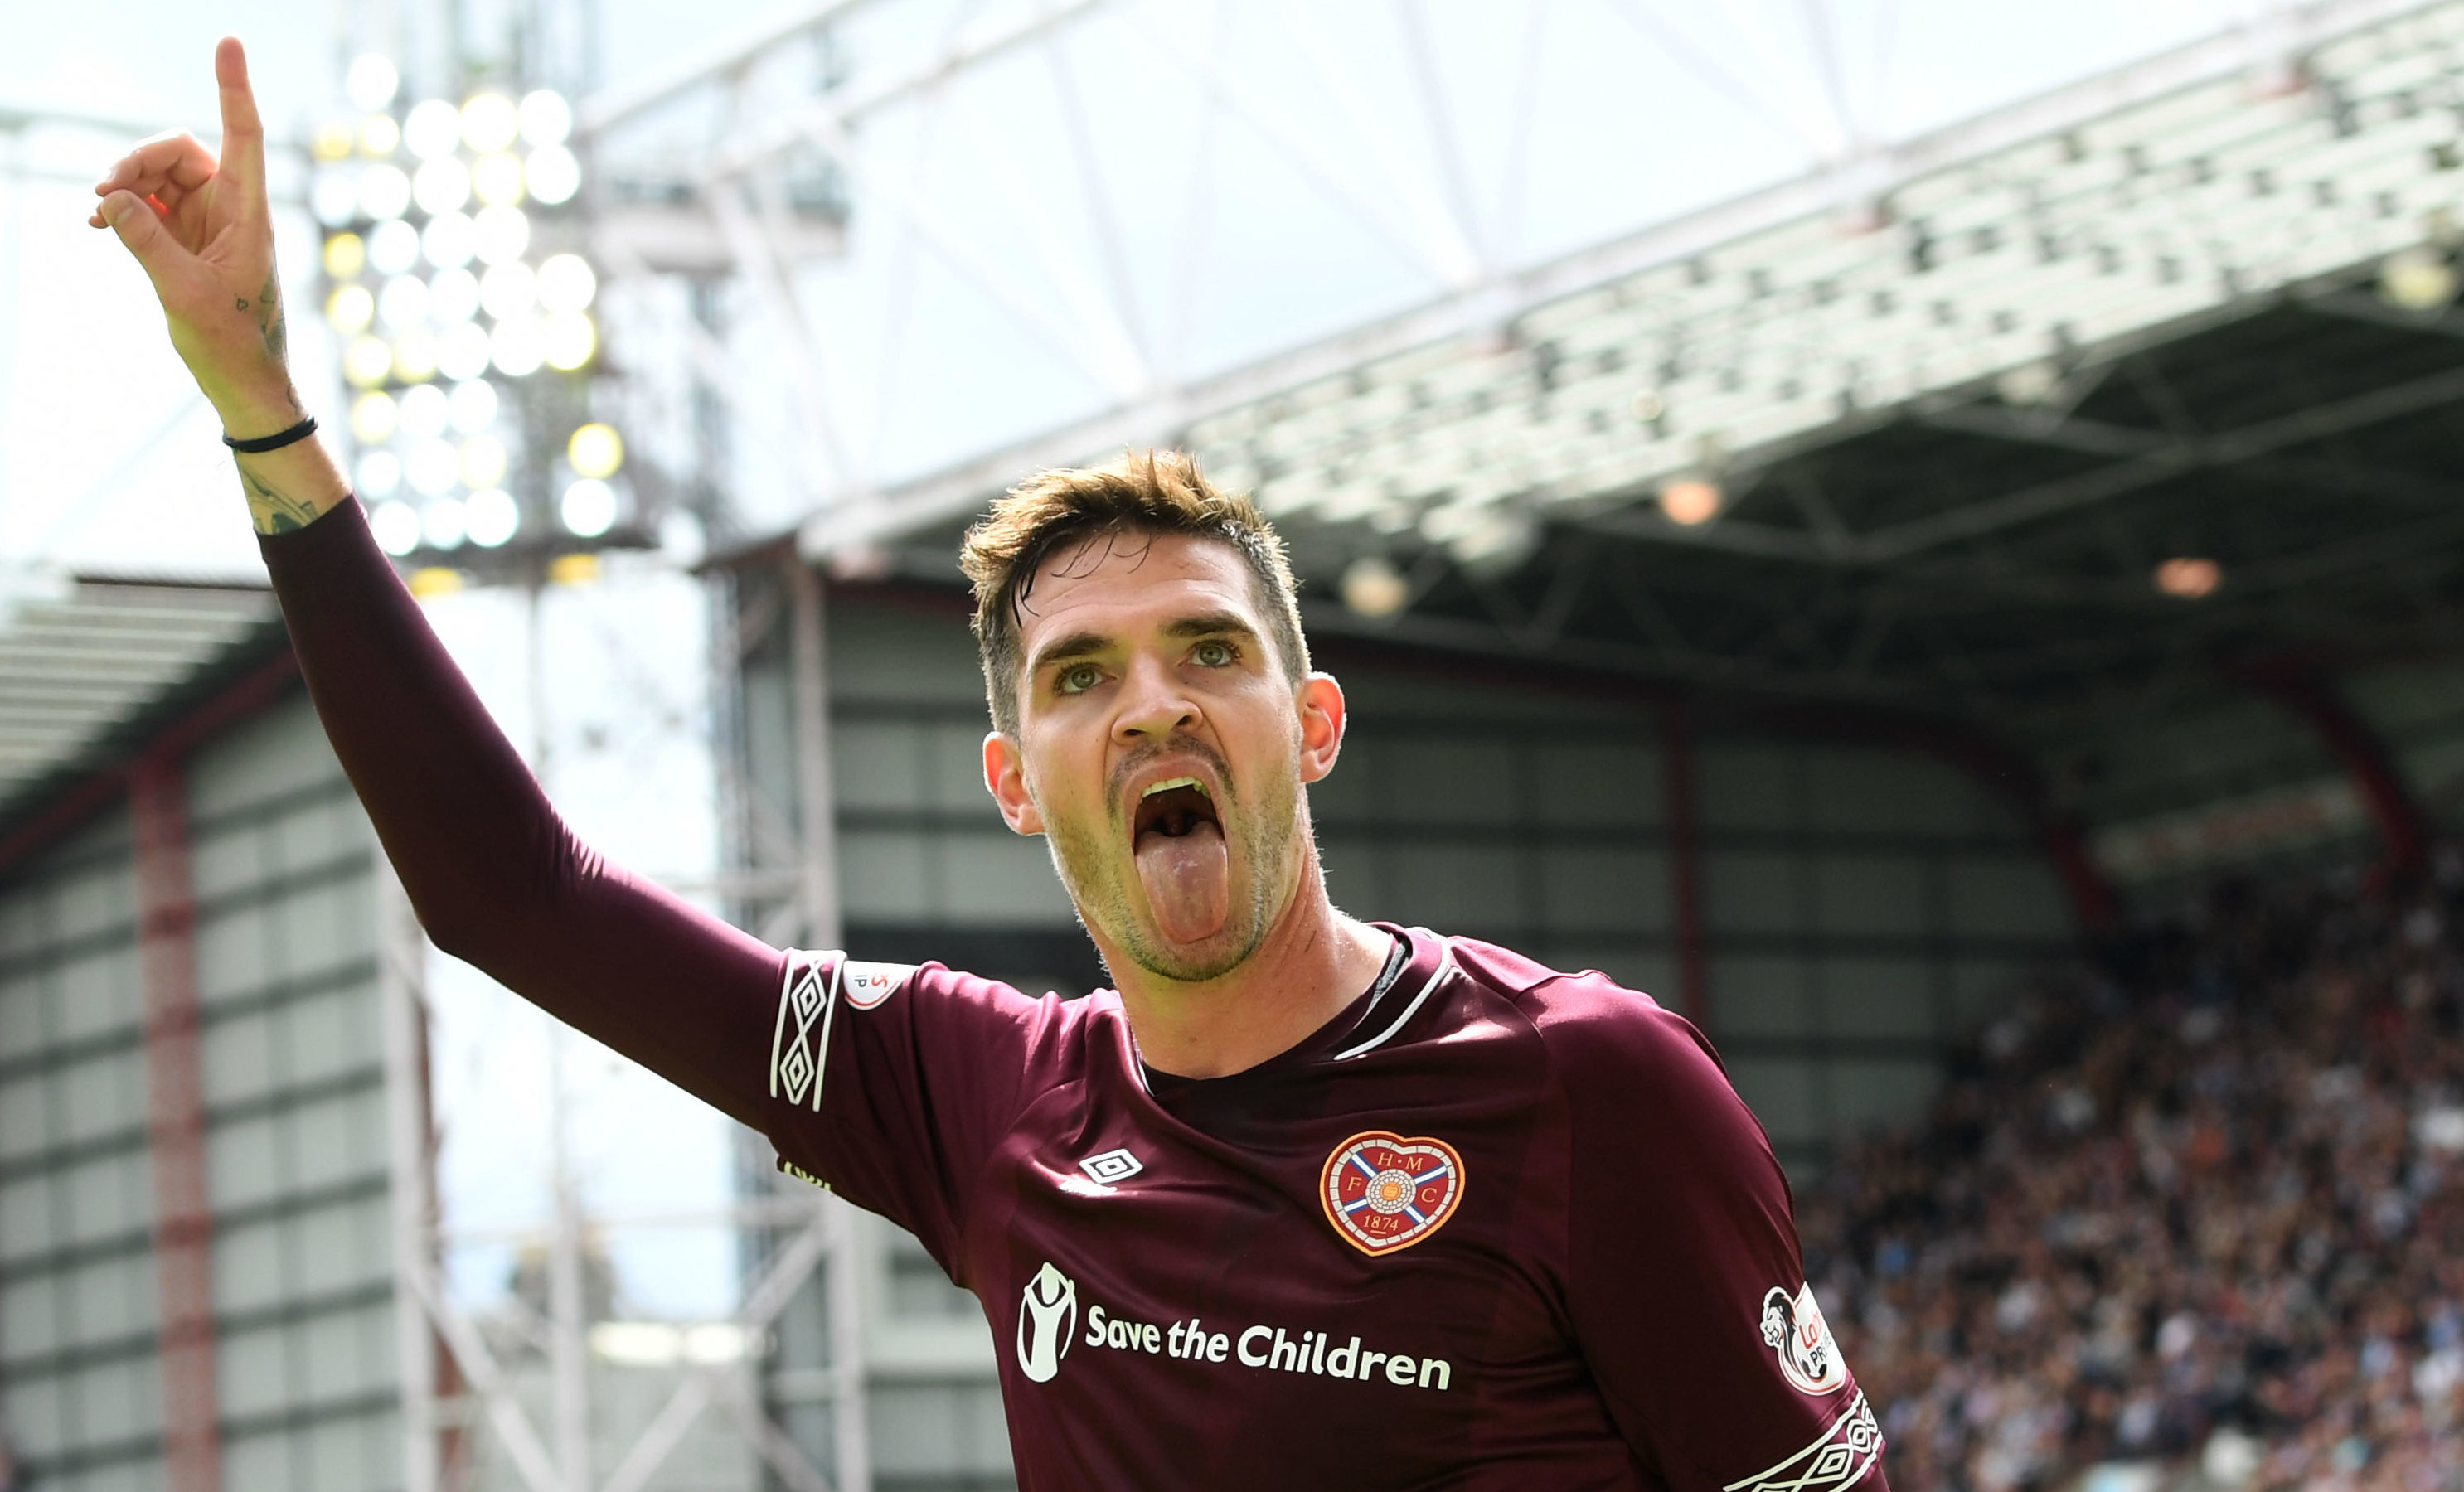 Kyle Lafferty netted for Hearts against Celtic last weekend (SNS Group / Craig Williamson)